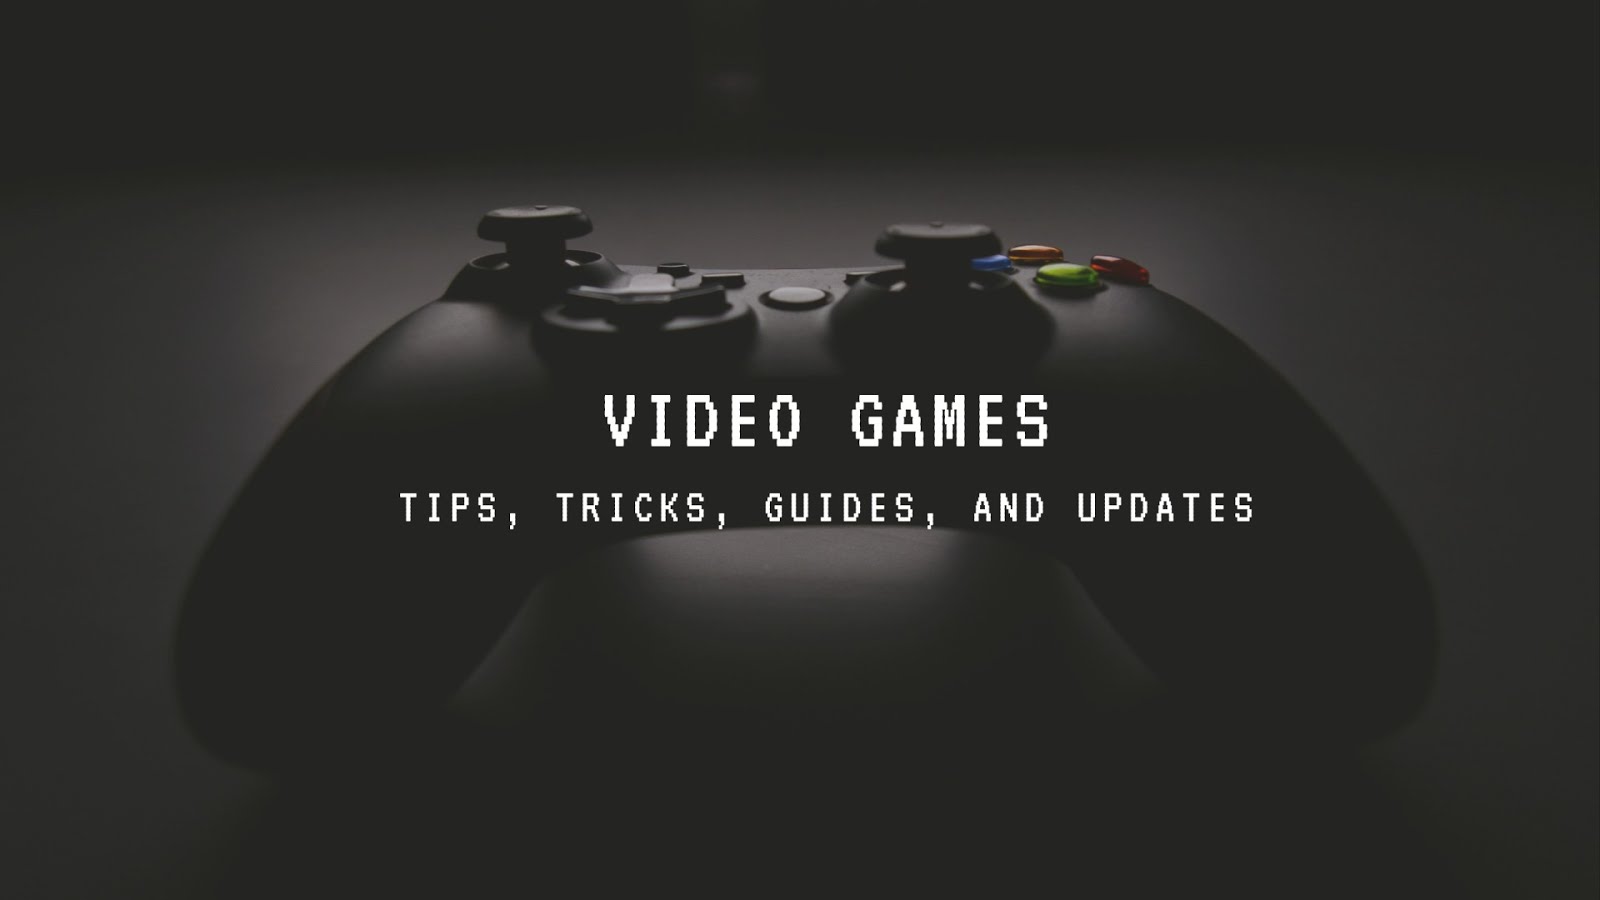 Video Games Tips, Tricks, and Guides